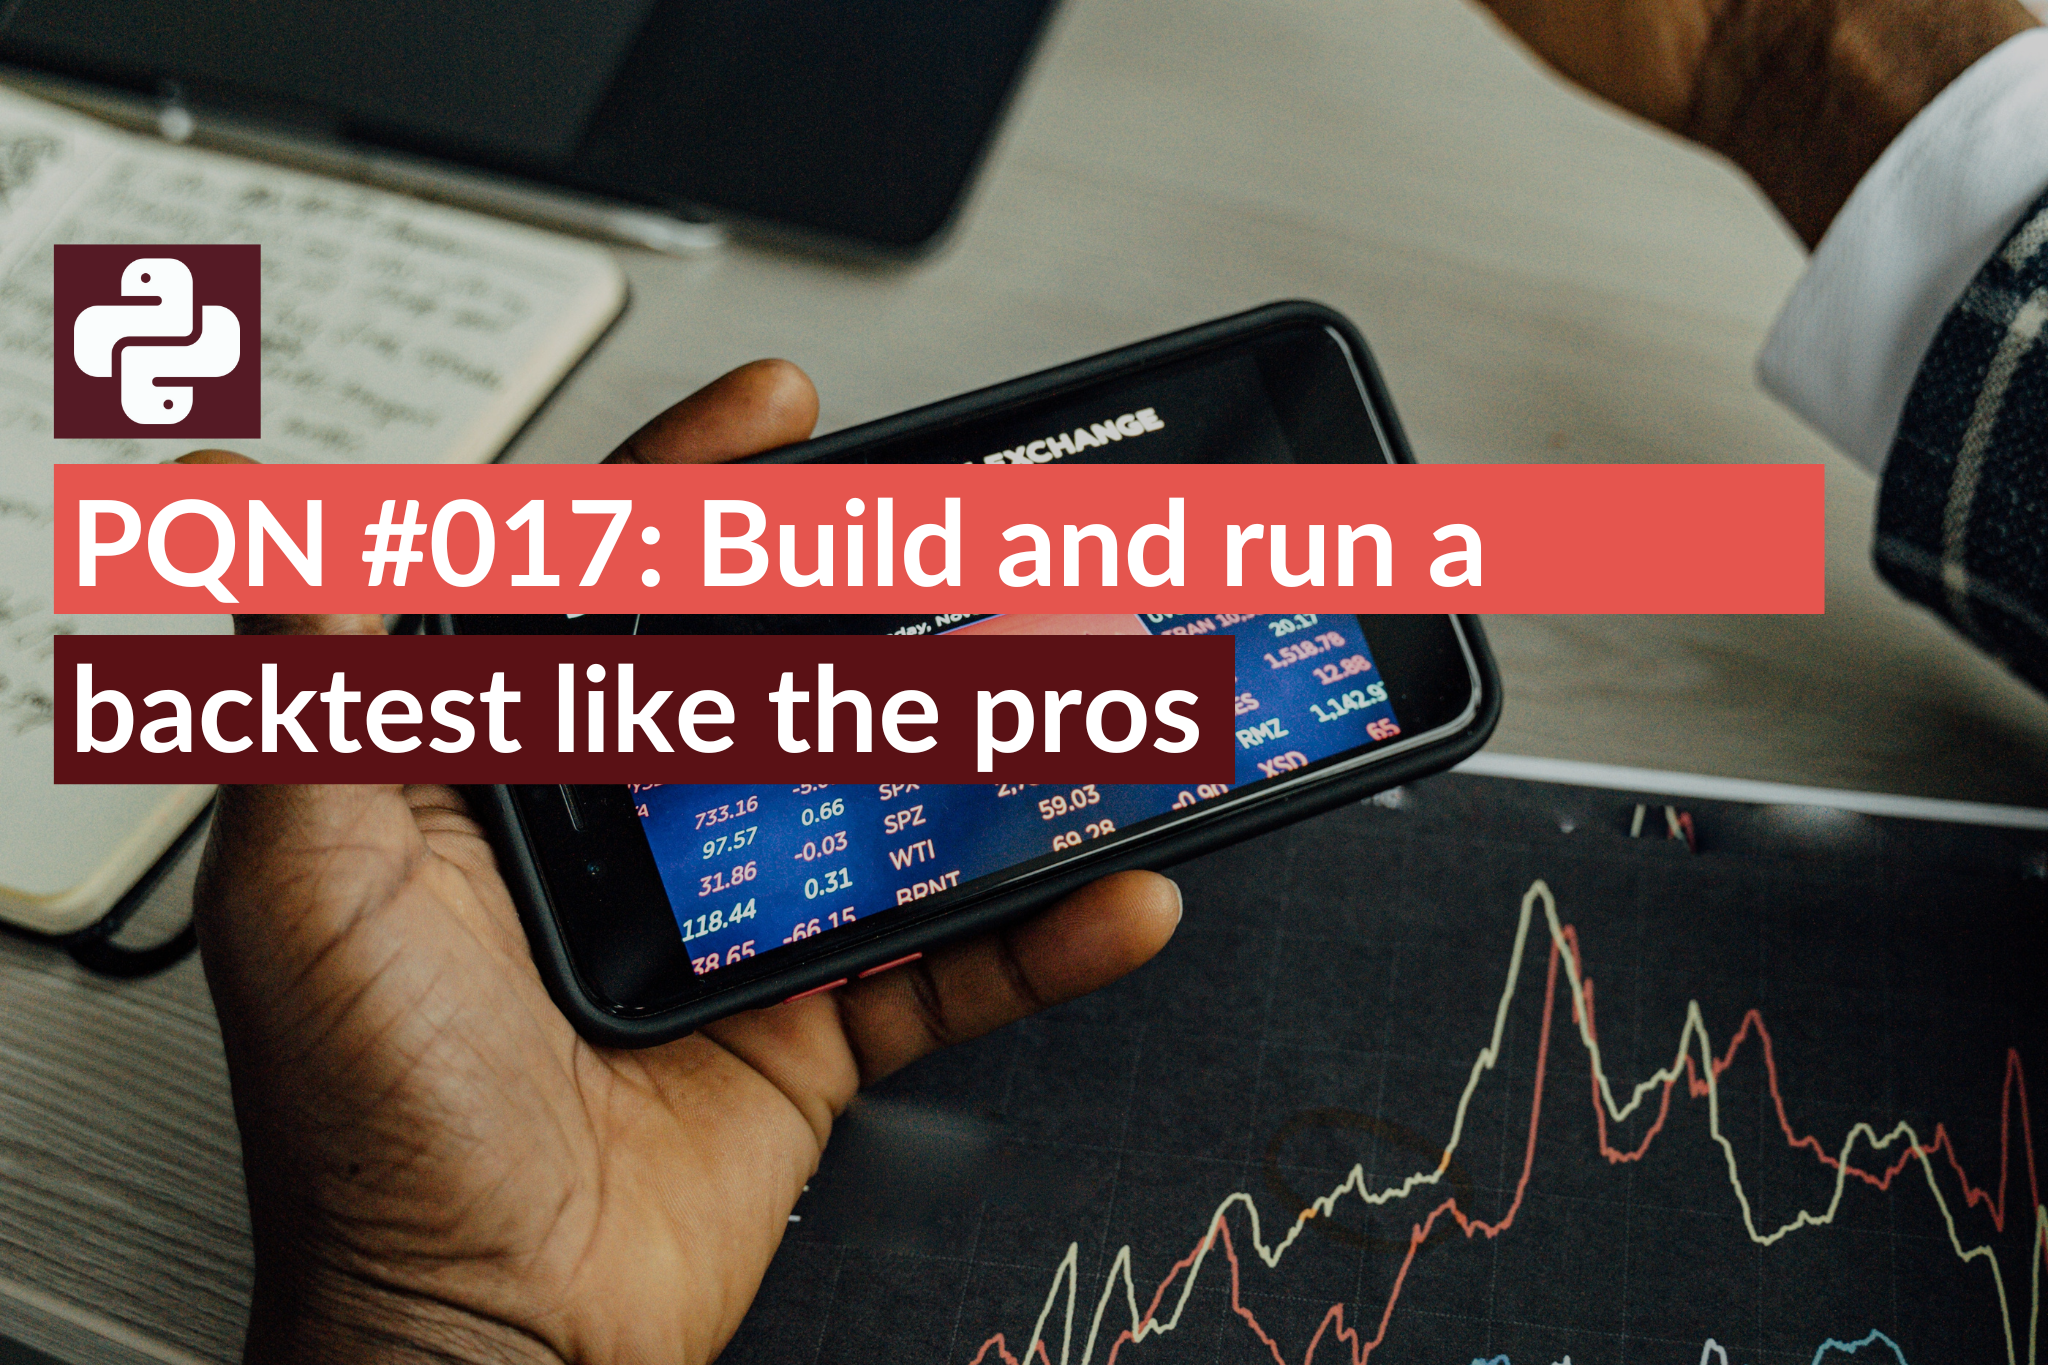 PQN #017 Build and run a backtest like the pros